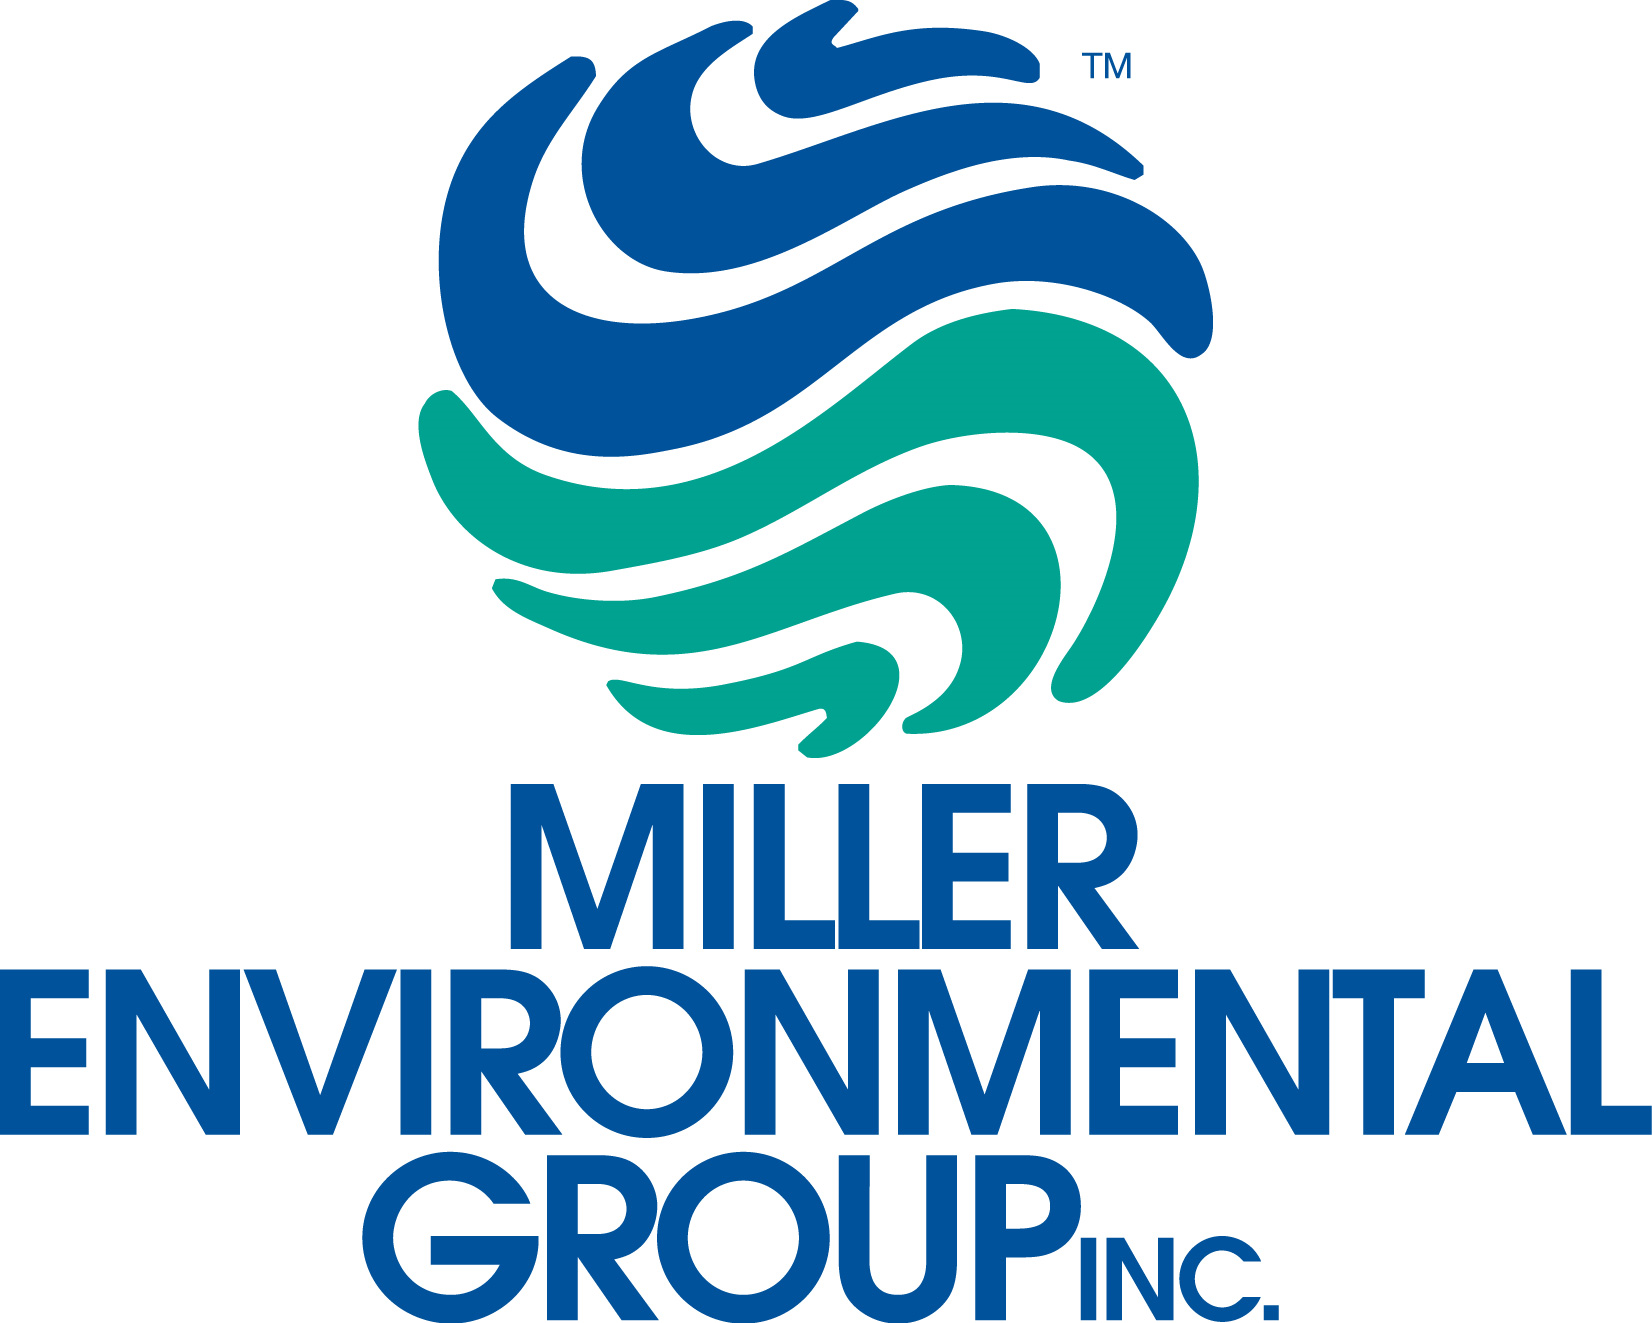 Miller Environmental Group Inc. Expands Its Reach Into Connecticut